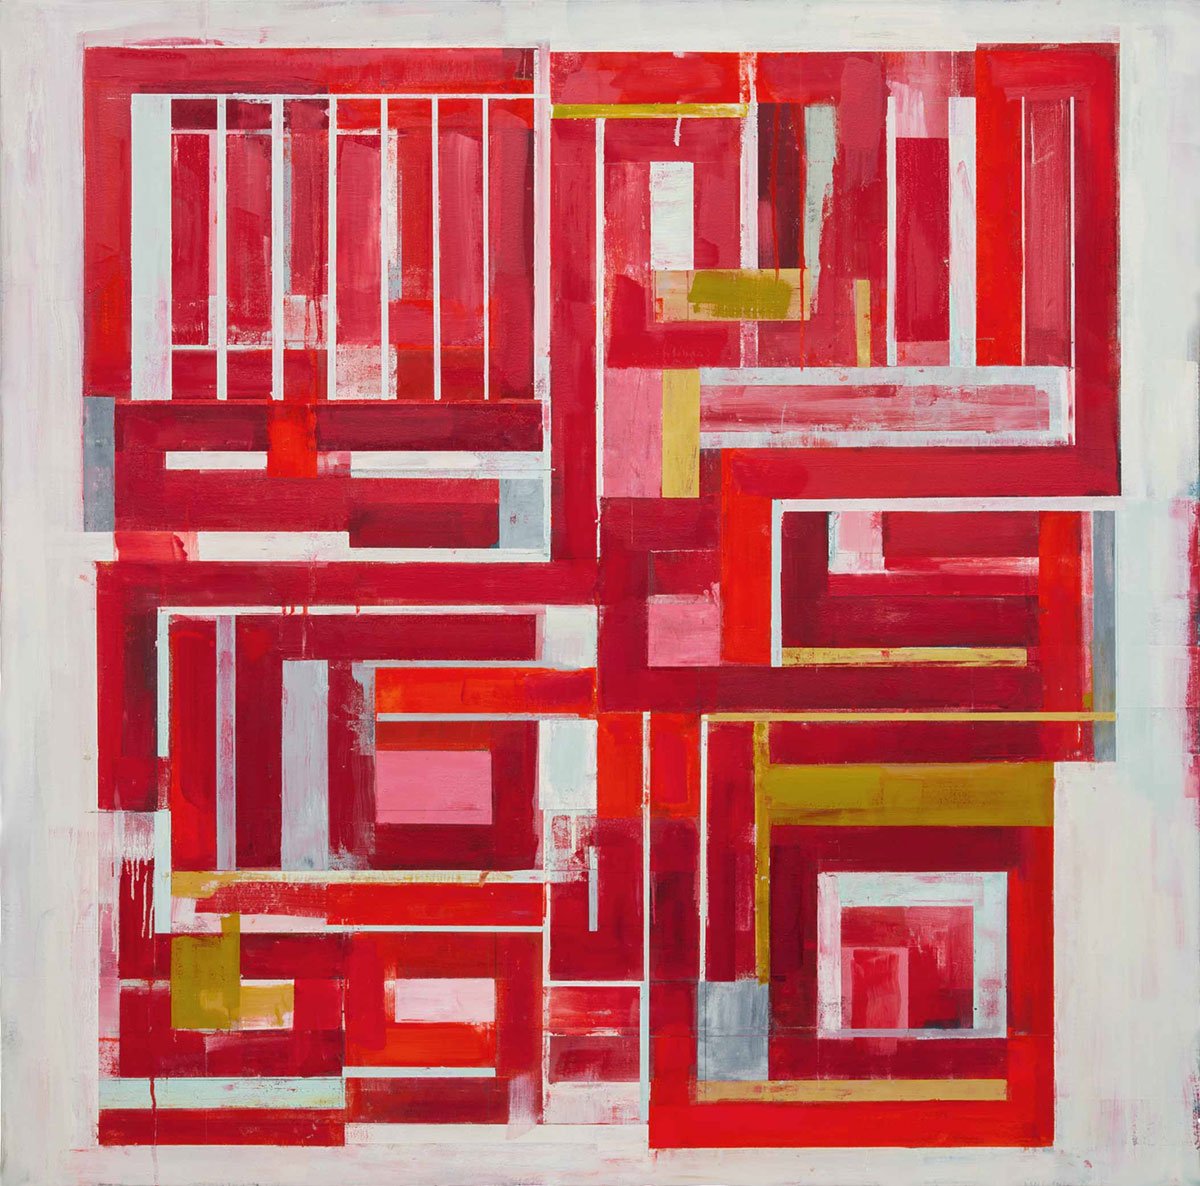  Lloyd Martin   Red Rivers  (2020)  Oil on canvas, 48” x 48” 